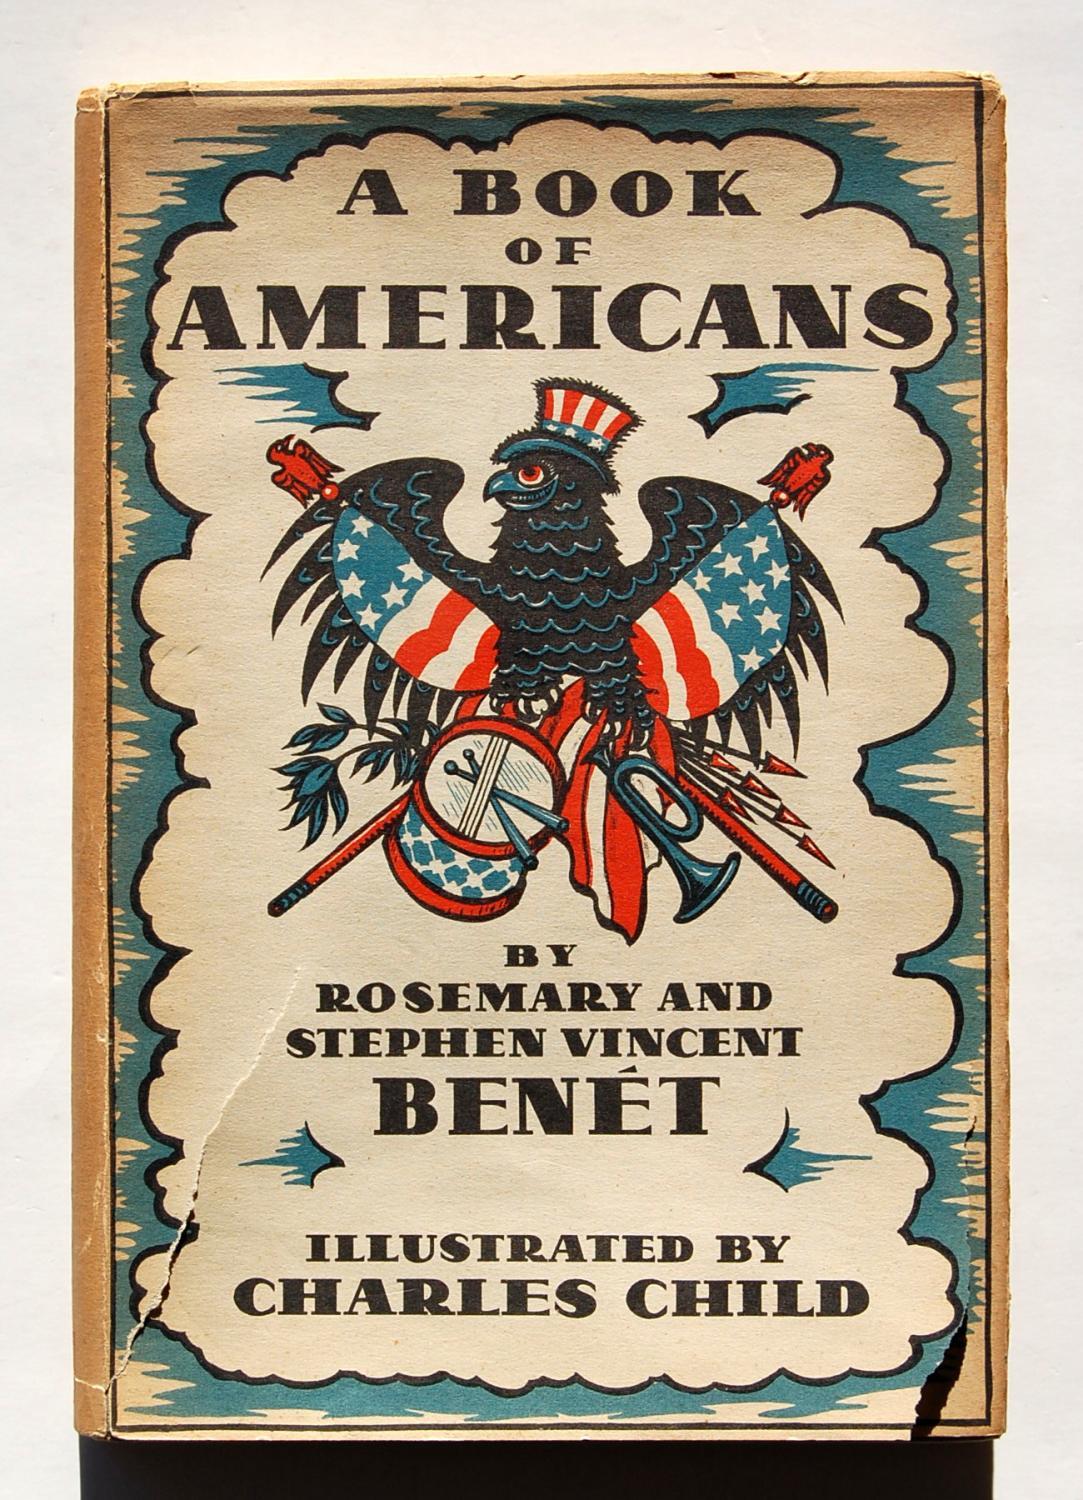 “A Book of Americans” by Rosemary and Stephen Vincent Benét.